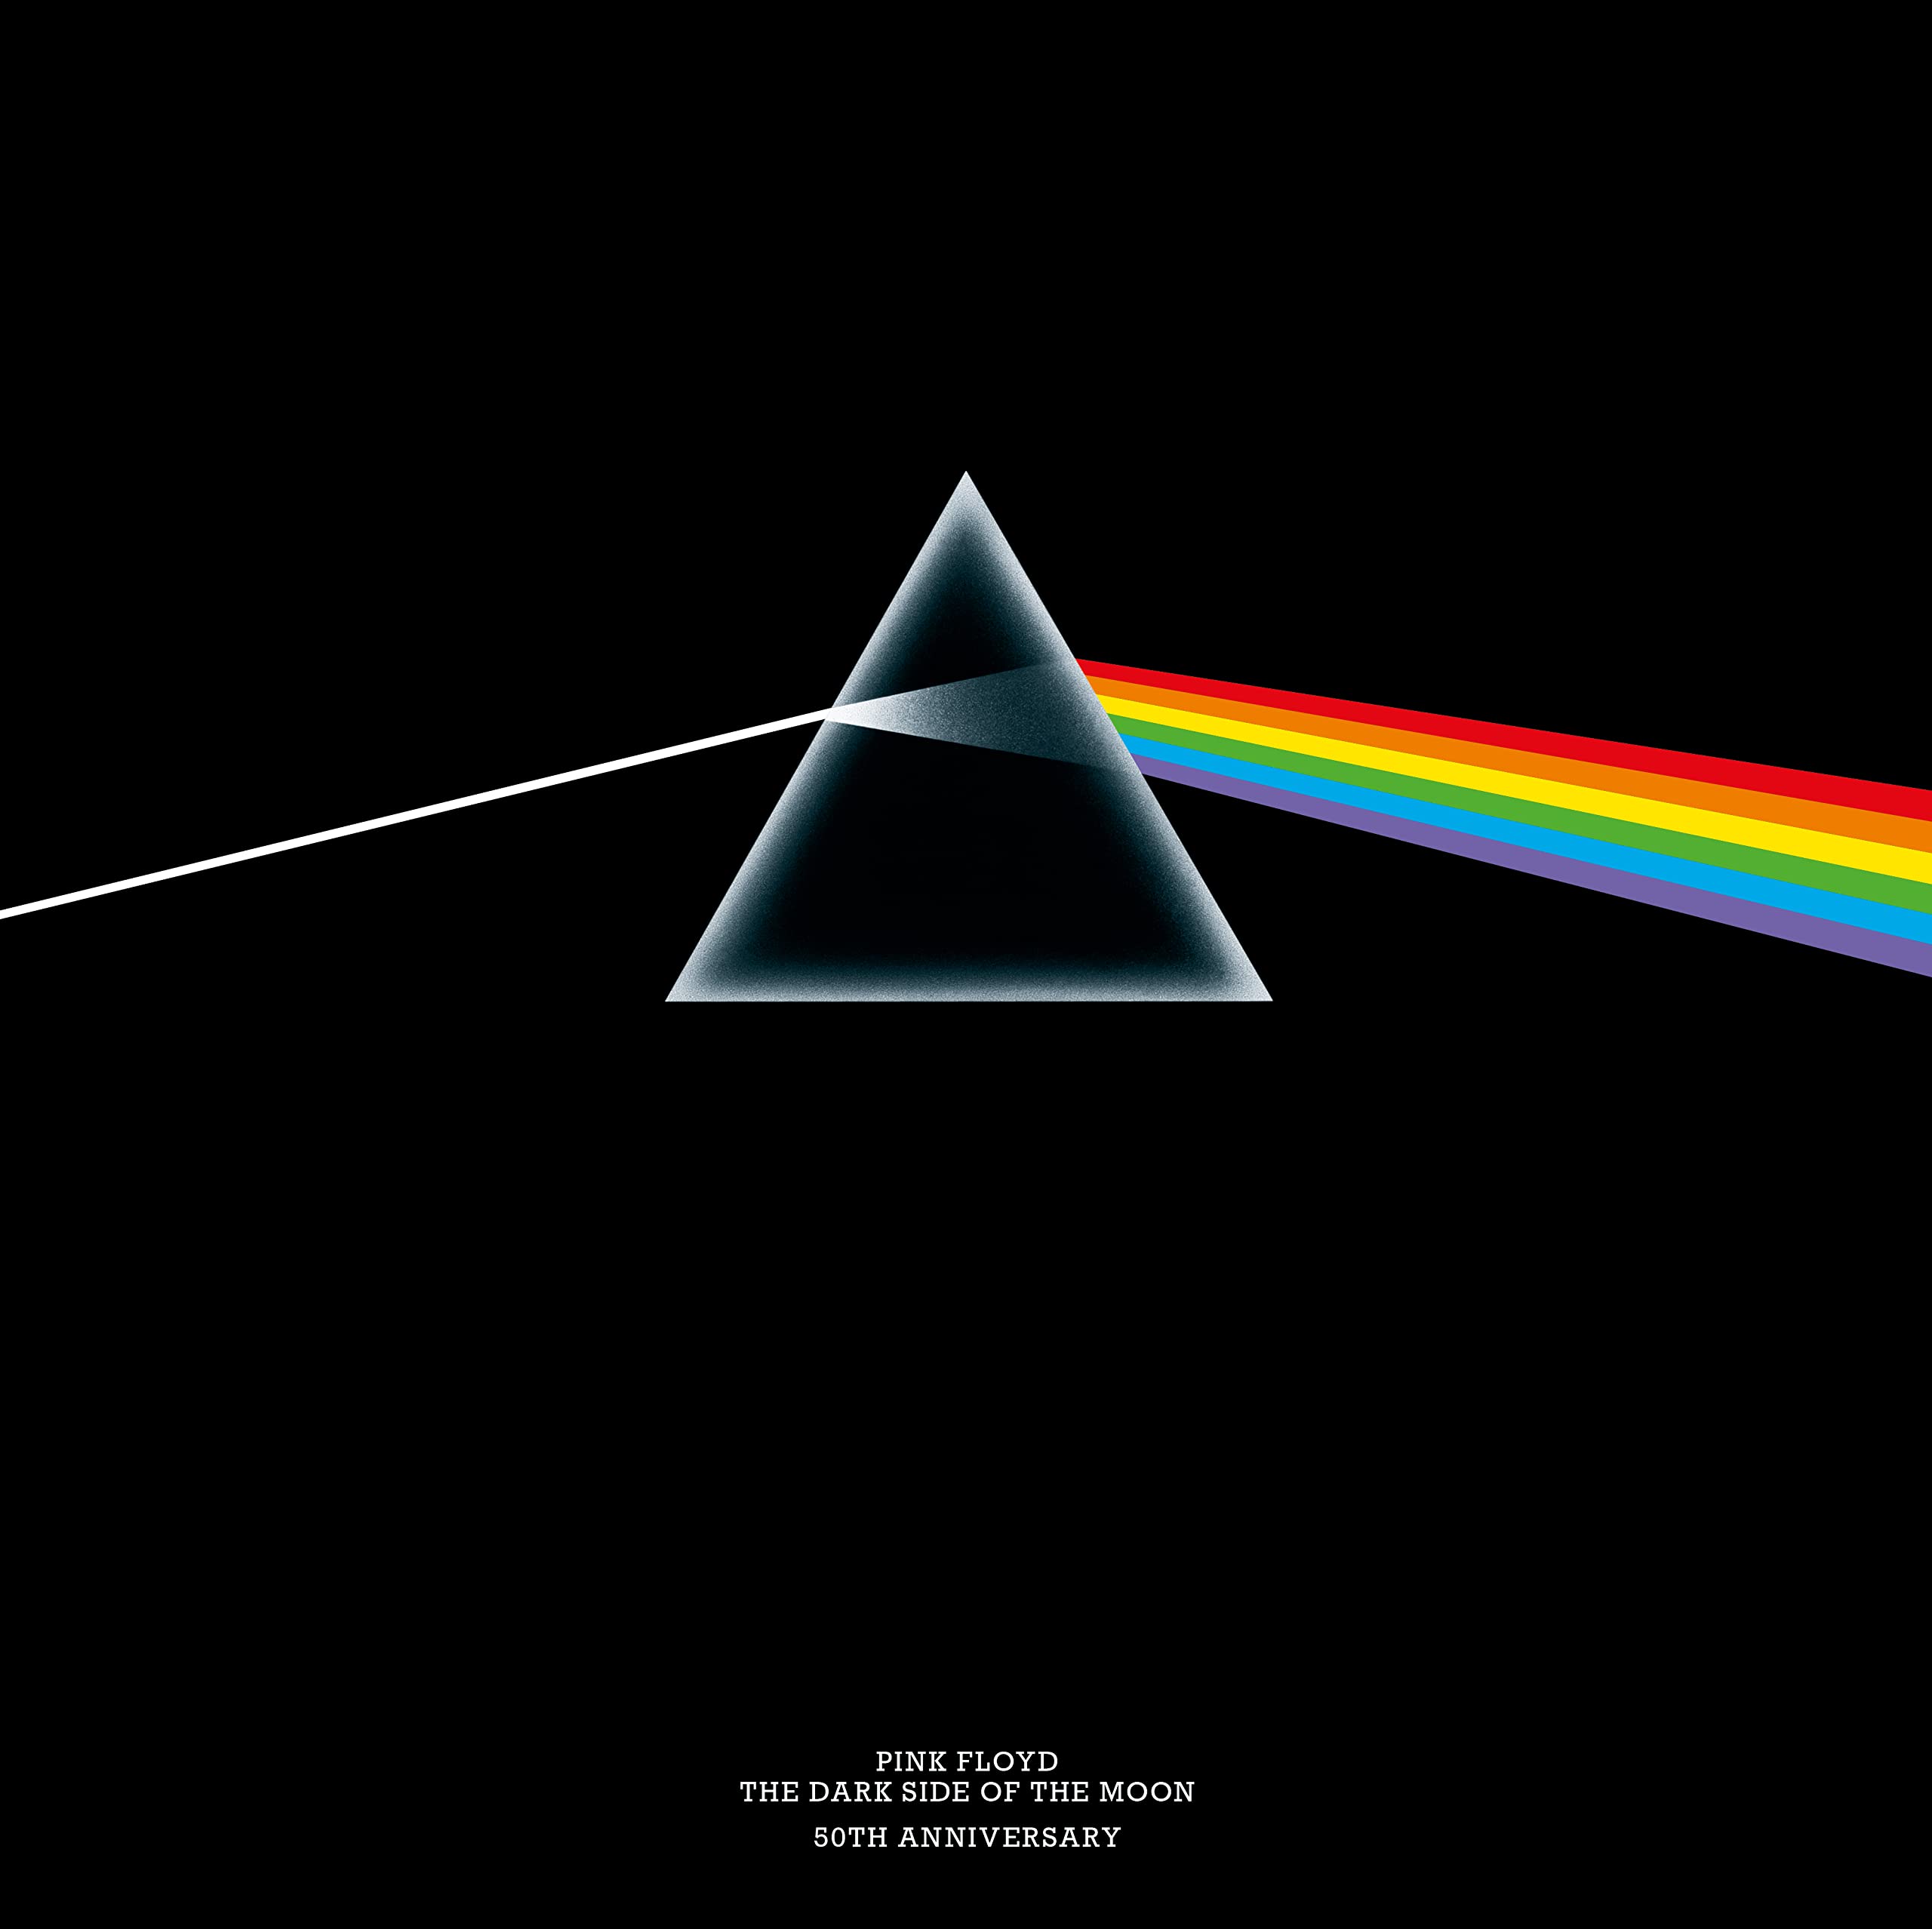 Pink_floyd_the_dark_side_of_the_moon book